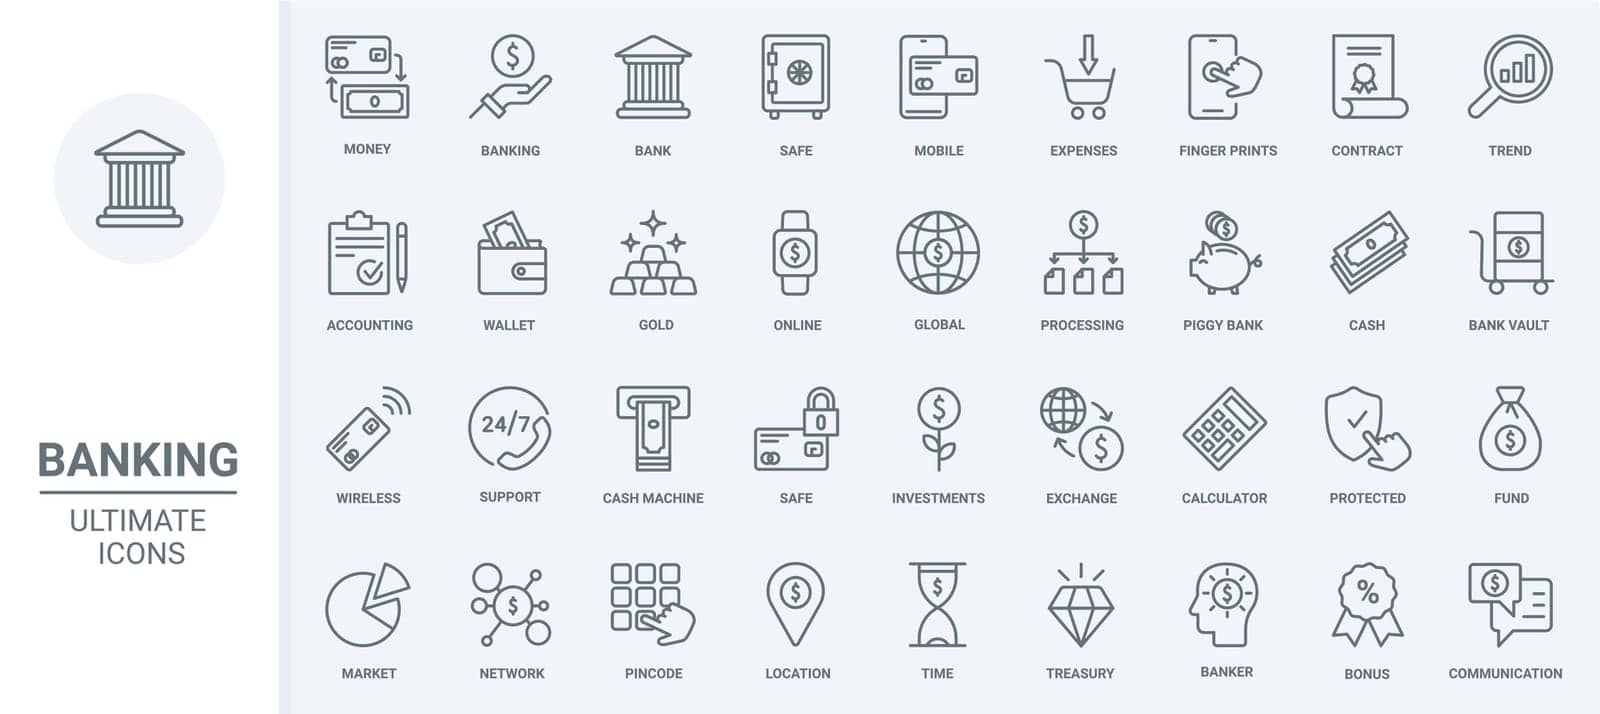 Finance, bank accounting and business analysis thin line icons set vector illustration. Outline budget management, economy and financial investment or expenses symbols, banking protection and contract